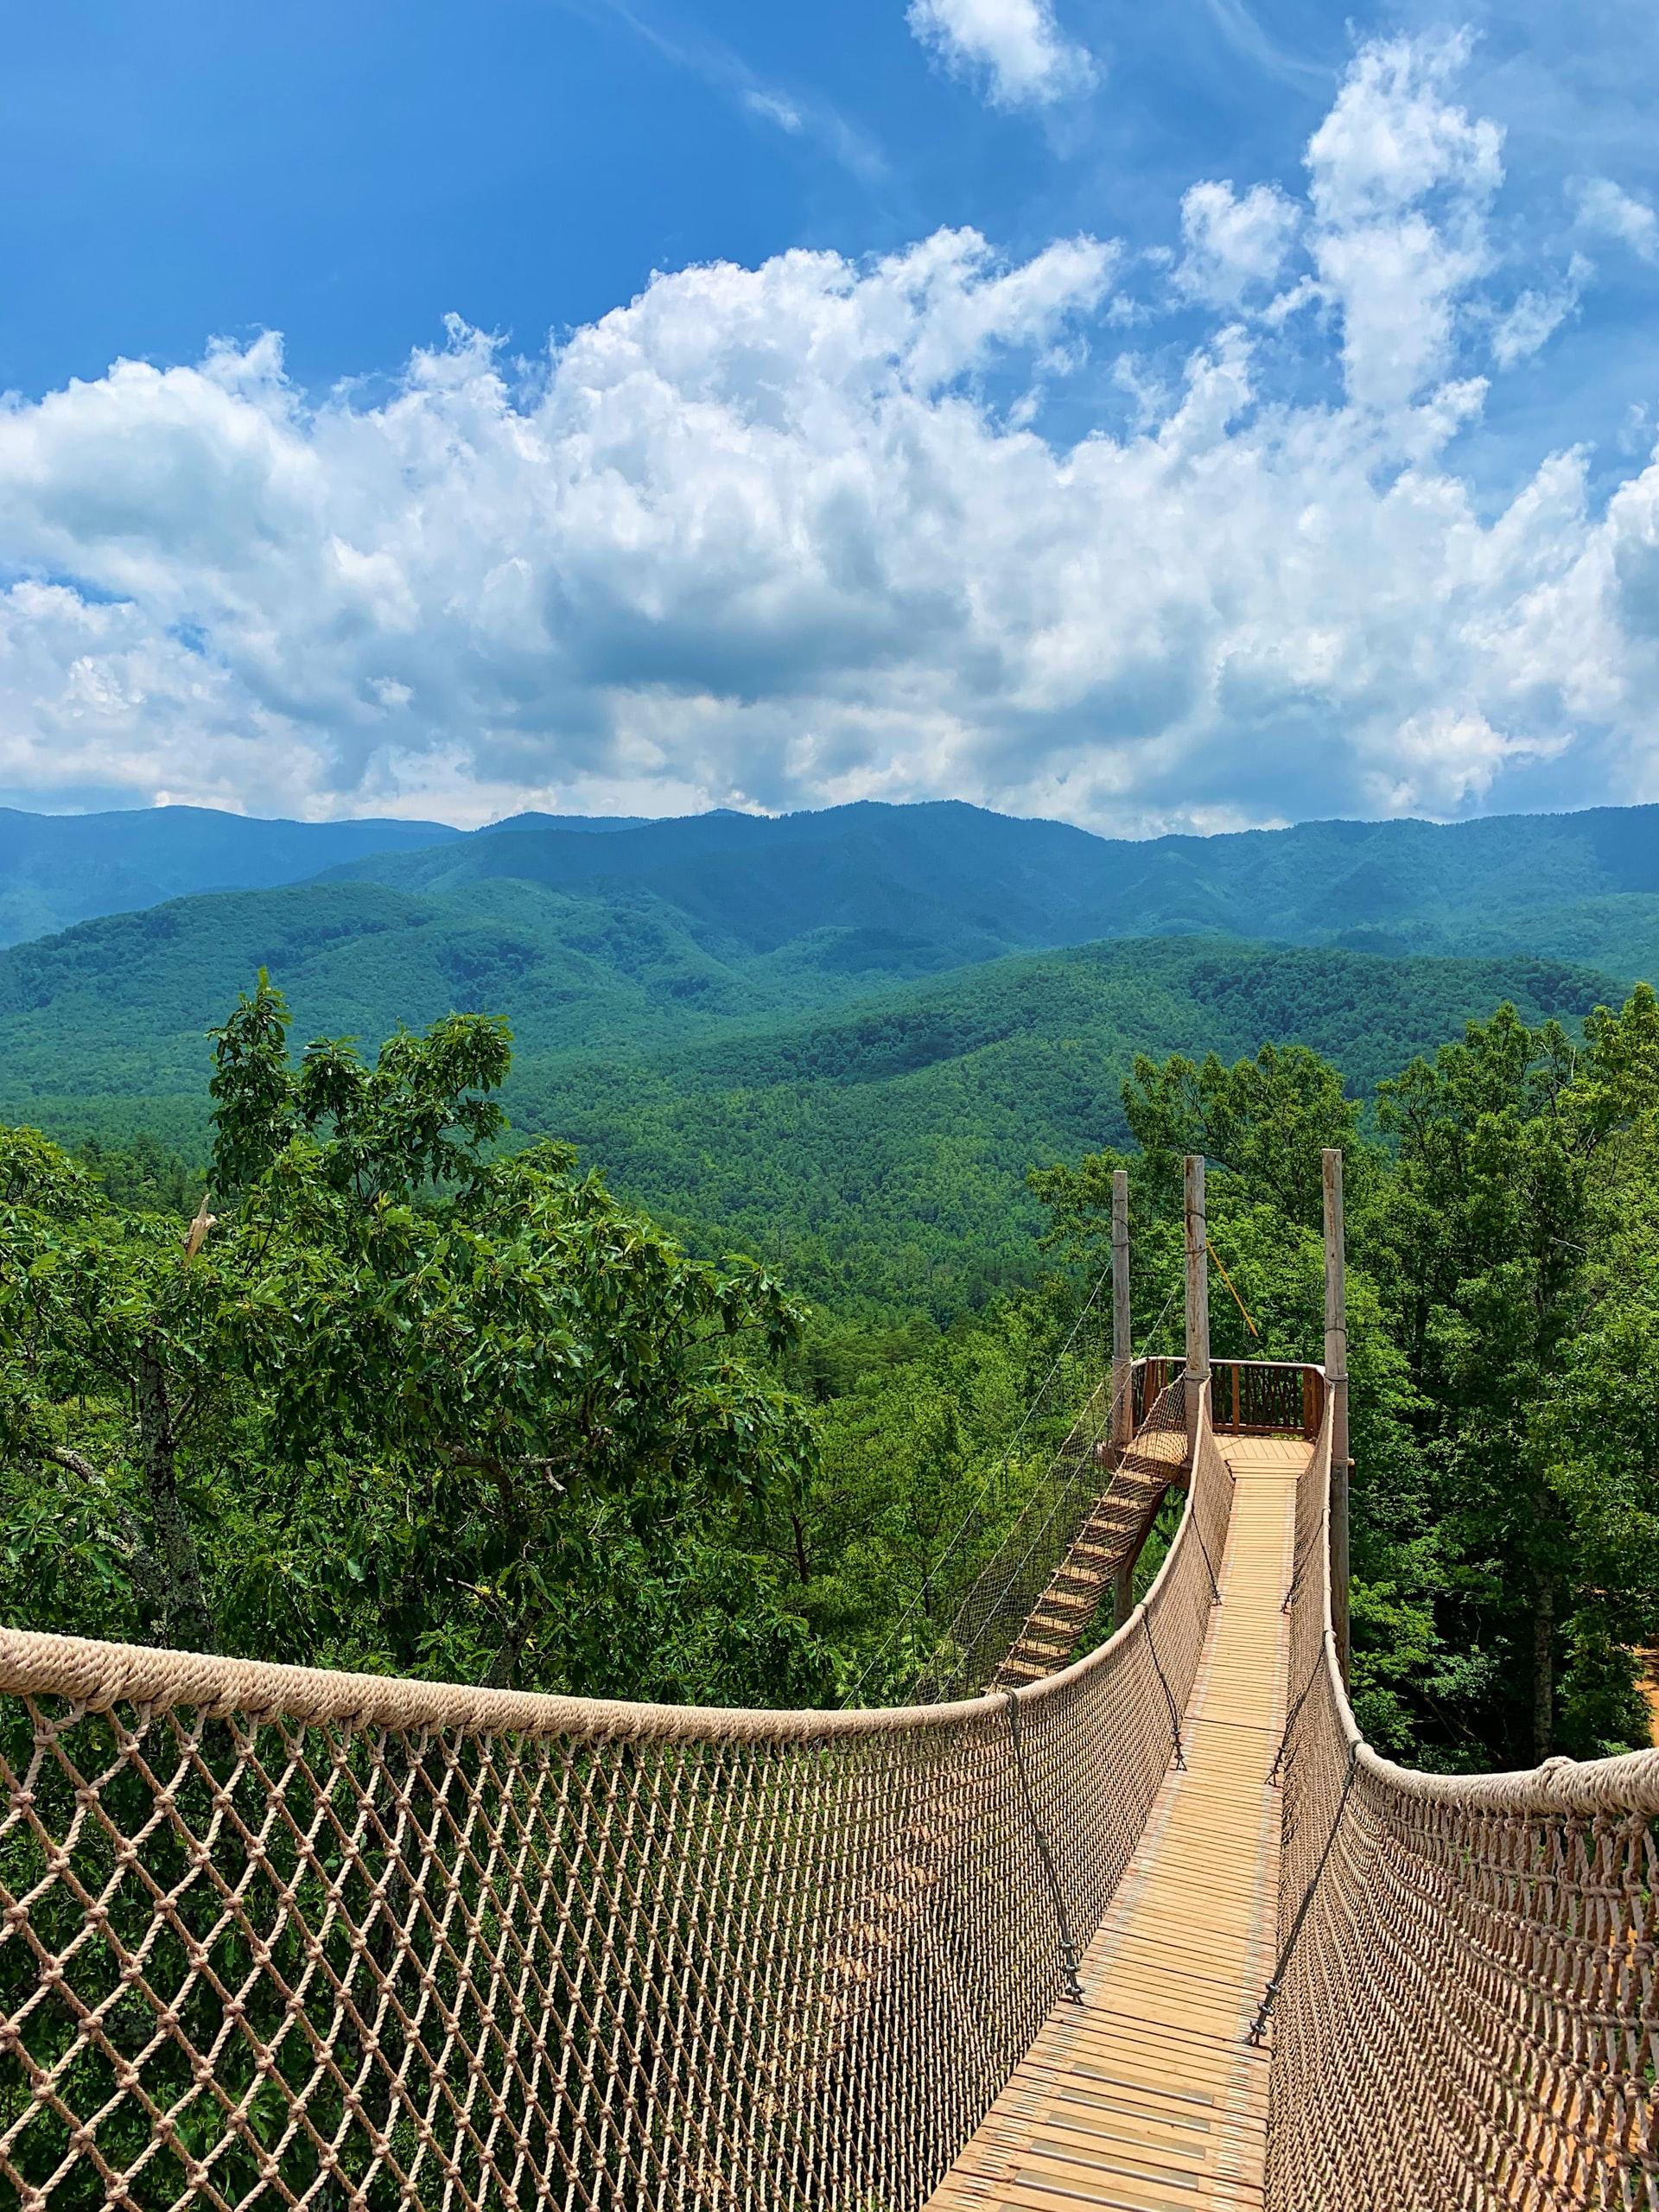 Clear summer day in Great Smoky Mountains National Park